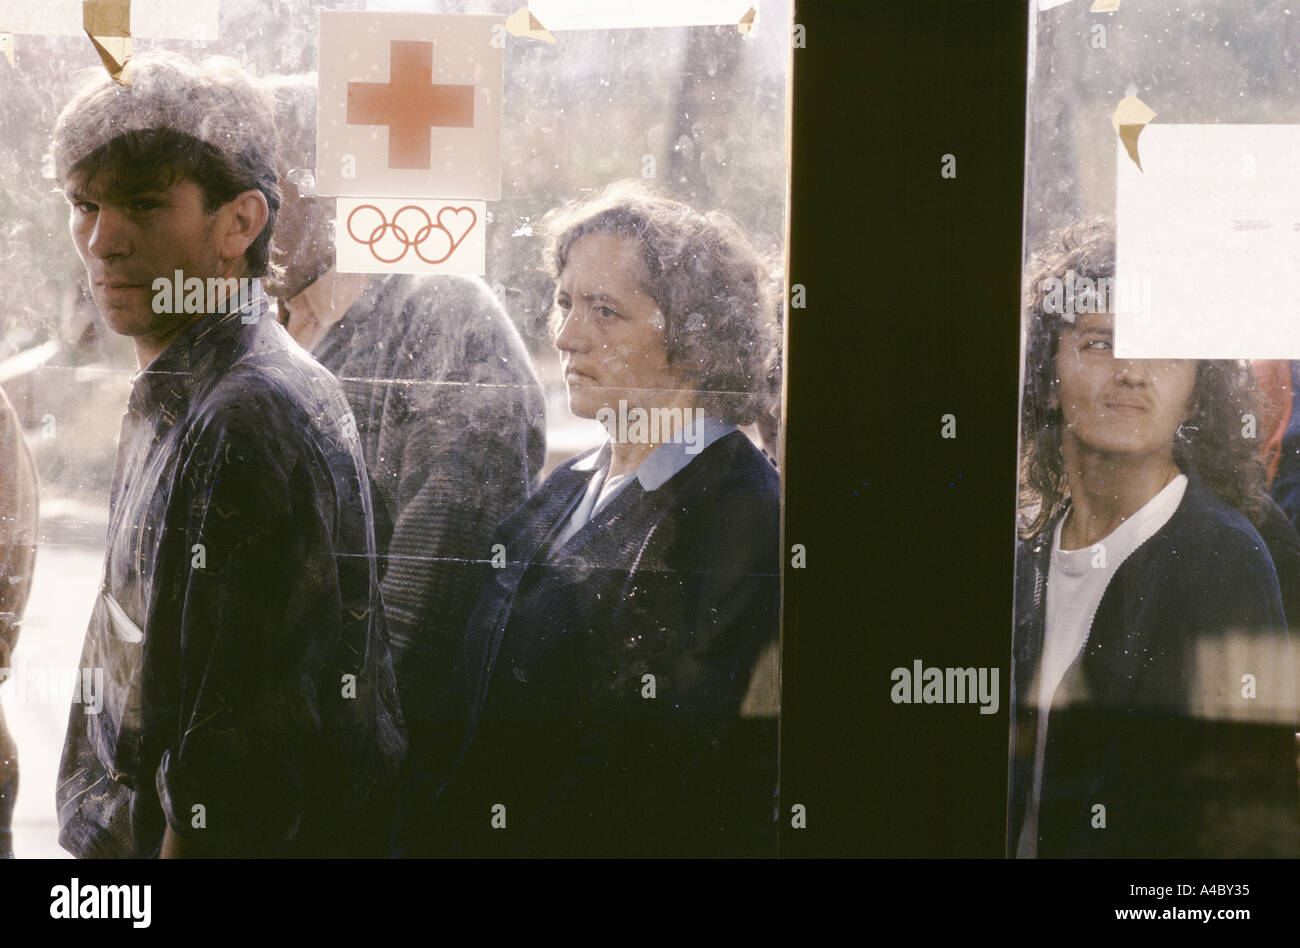 People queue for food from the Red Cross in the Serb-controlled area of Gabivica, Saravejo, September 1992 Stock Photo